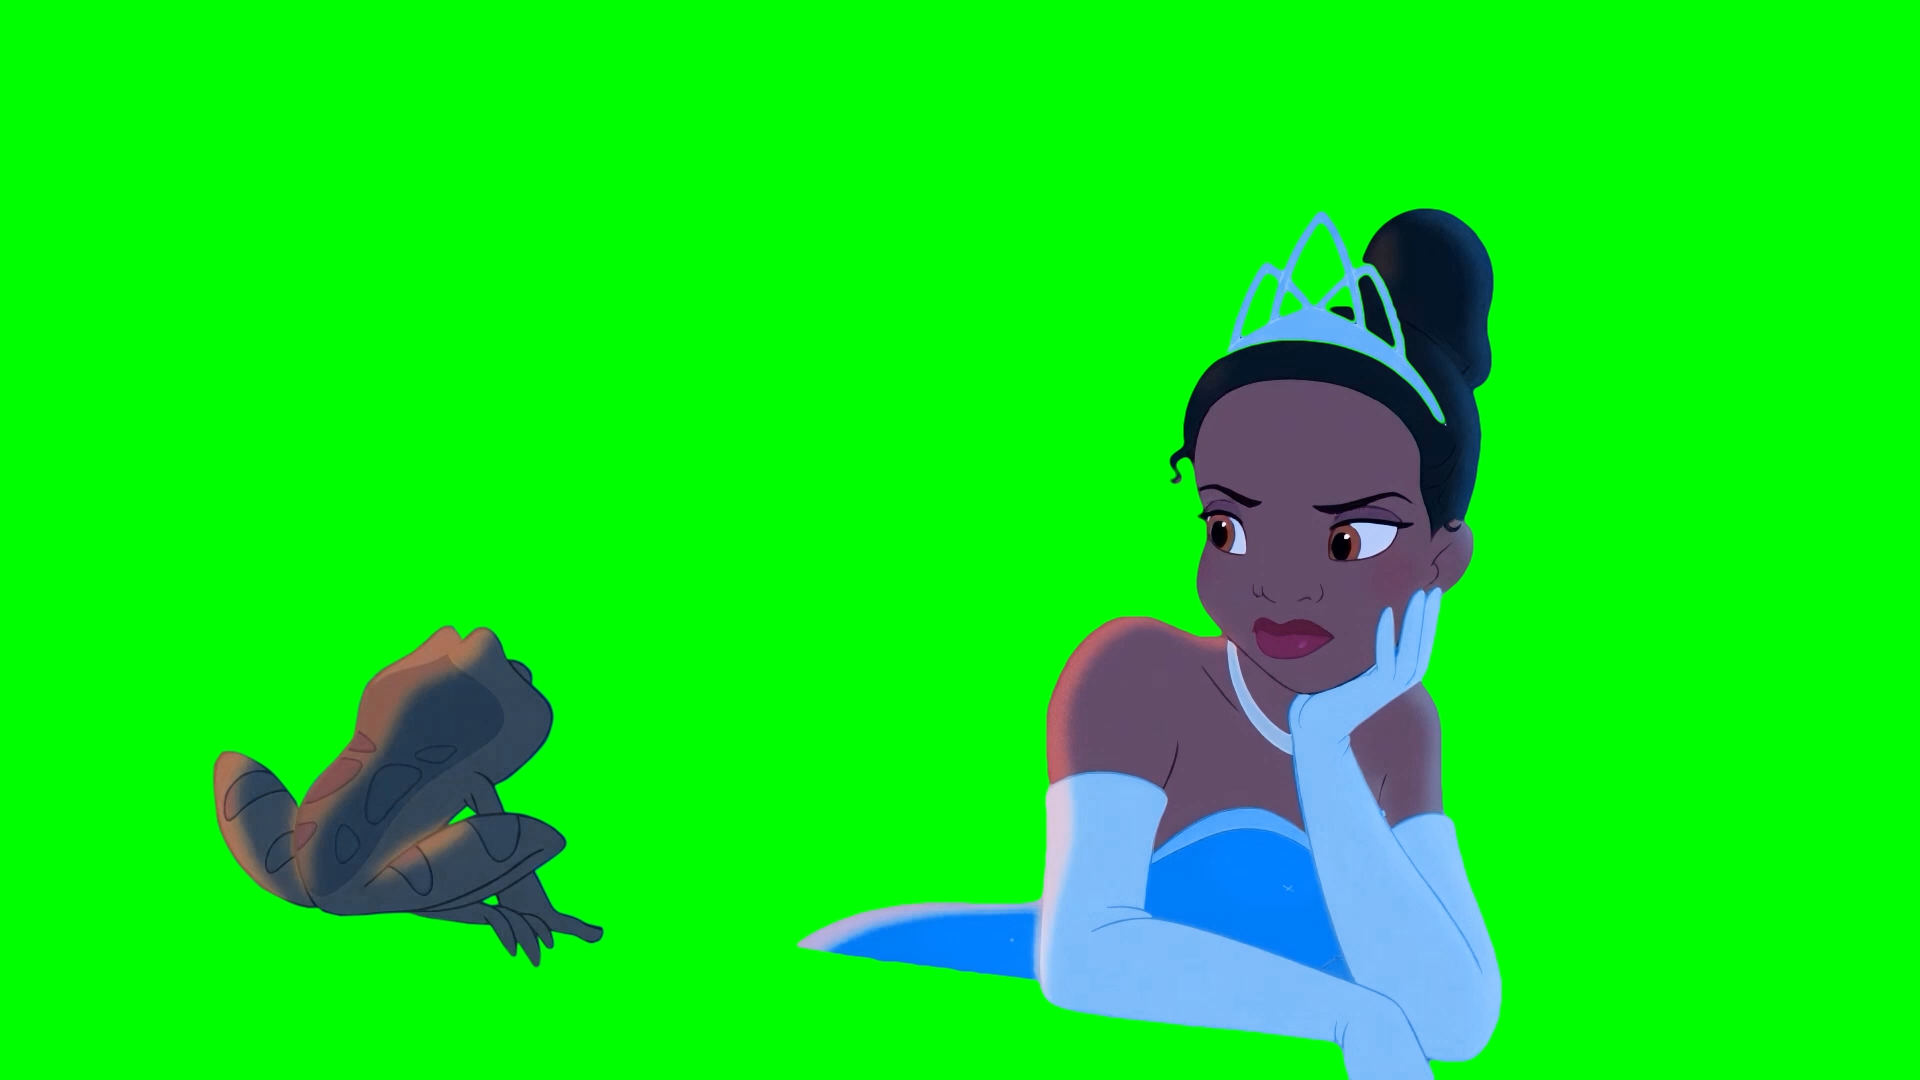 Kissing would be nice, yes? meme - The Princess and the Frog (Green Screen)